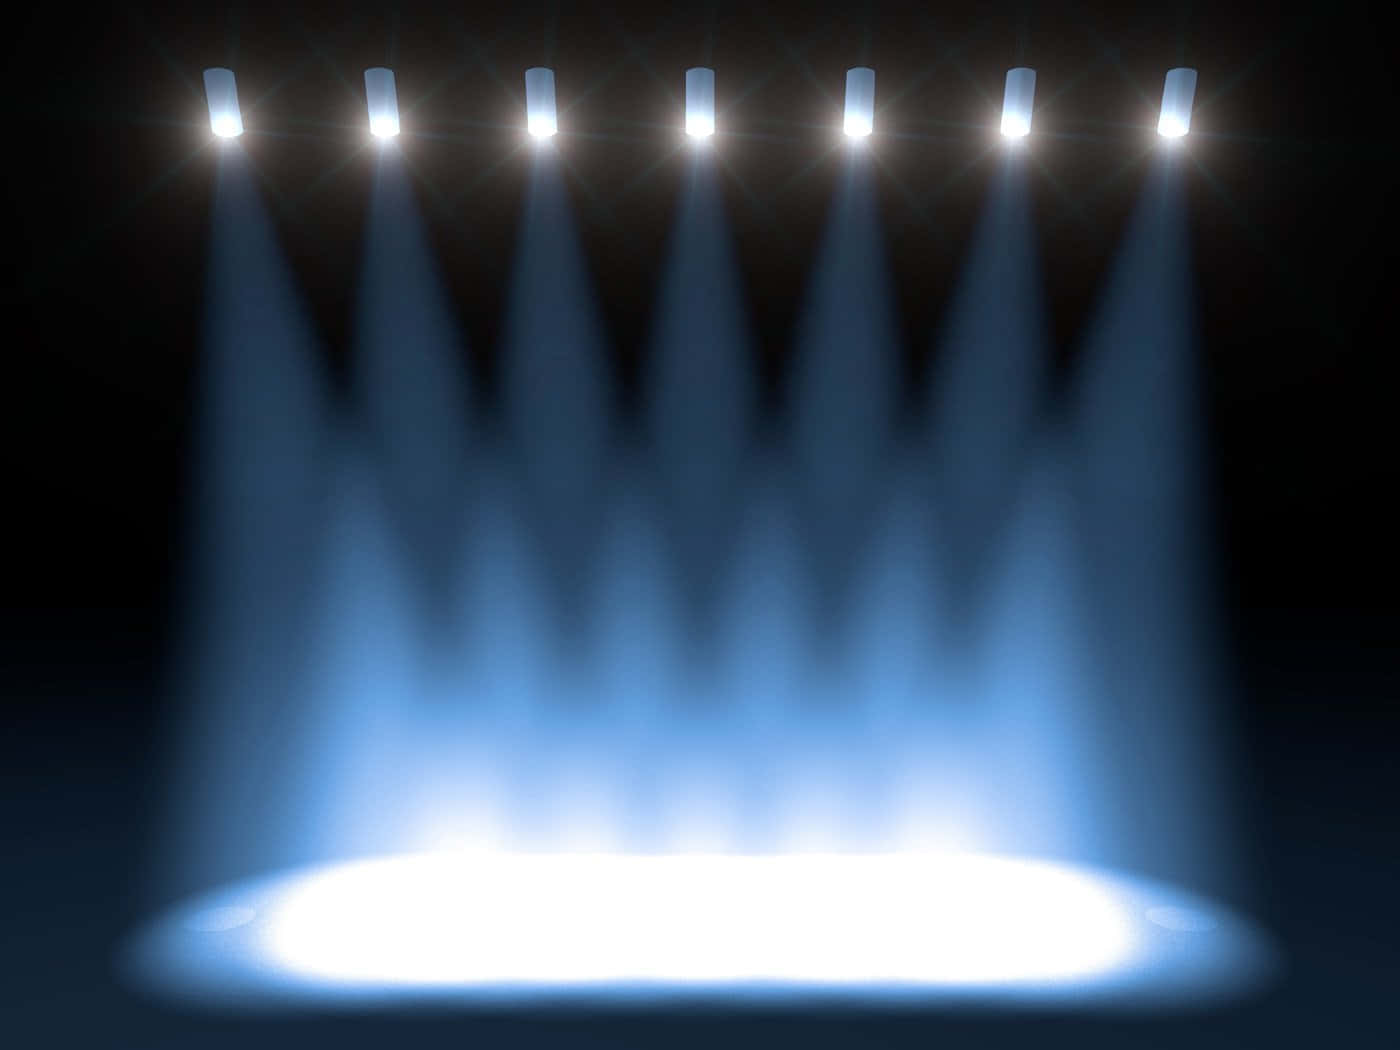 Stage Light Vector | Price 1 Credit Usd $1